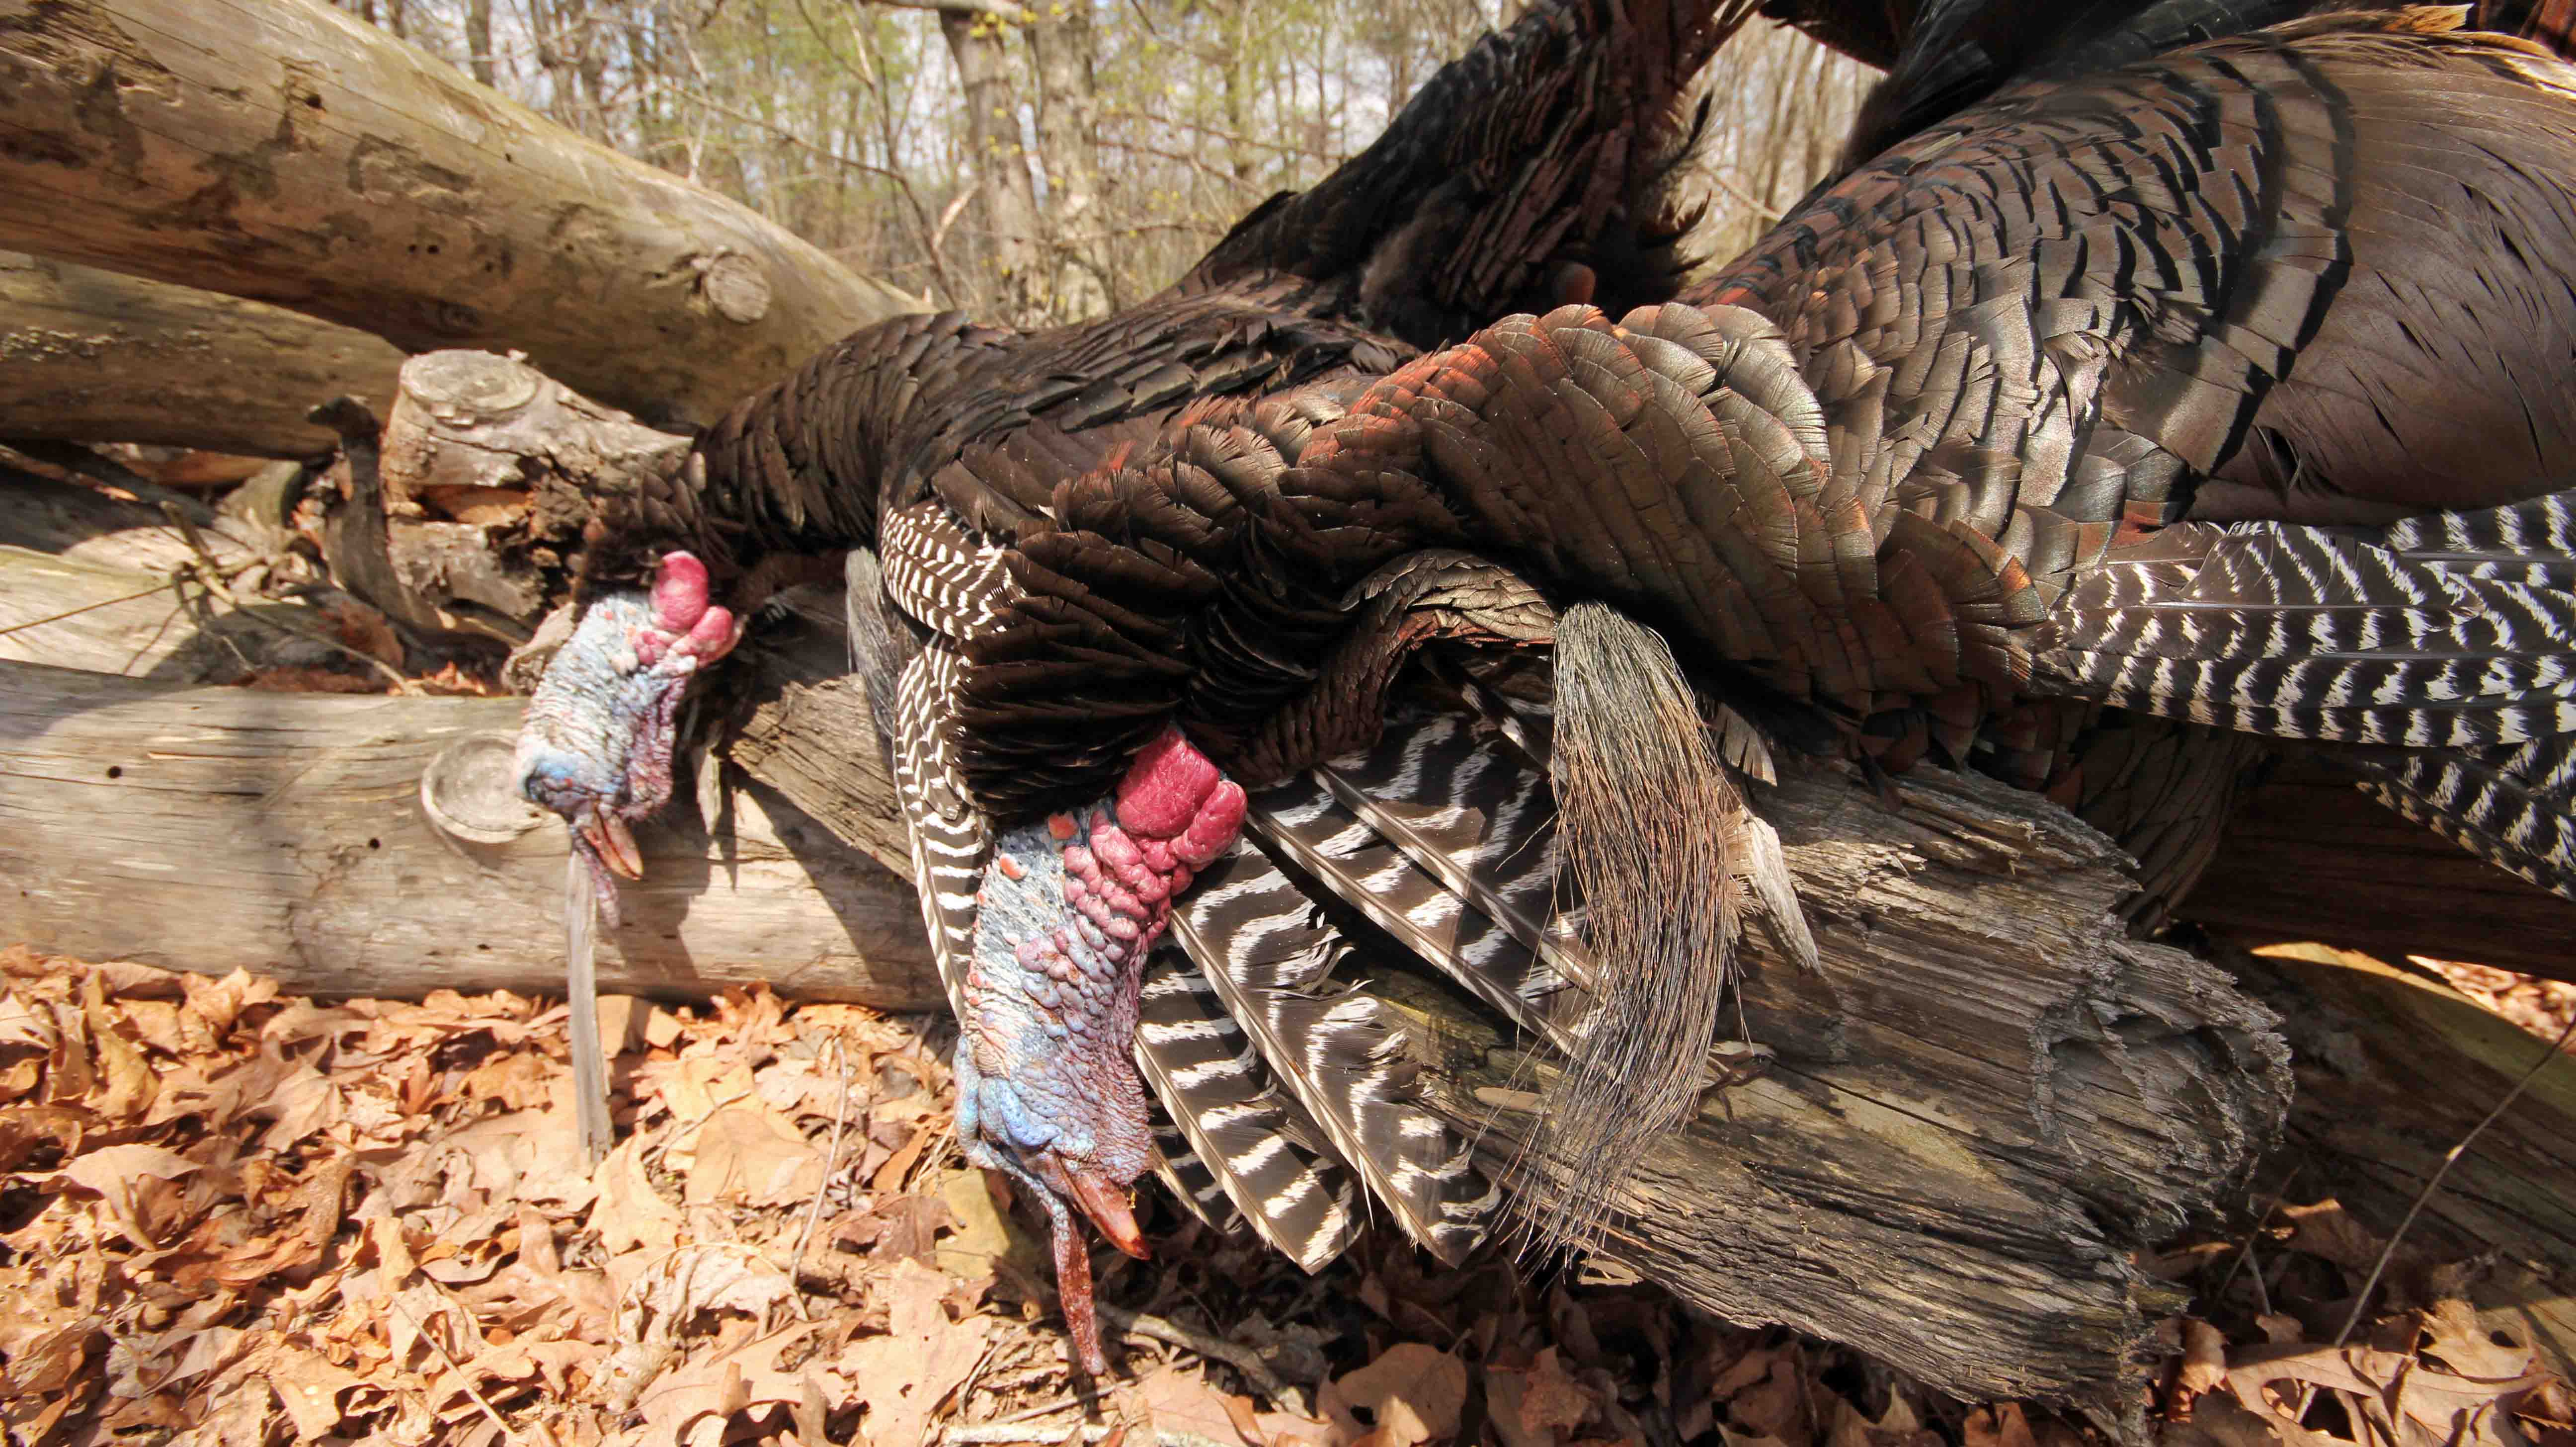 Turkey Hunting Wallpaper Pc Android iPhone And iPad